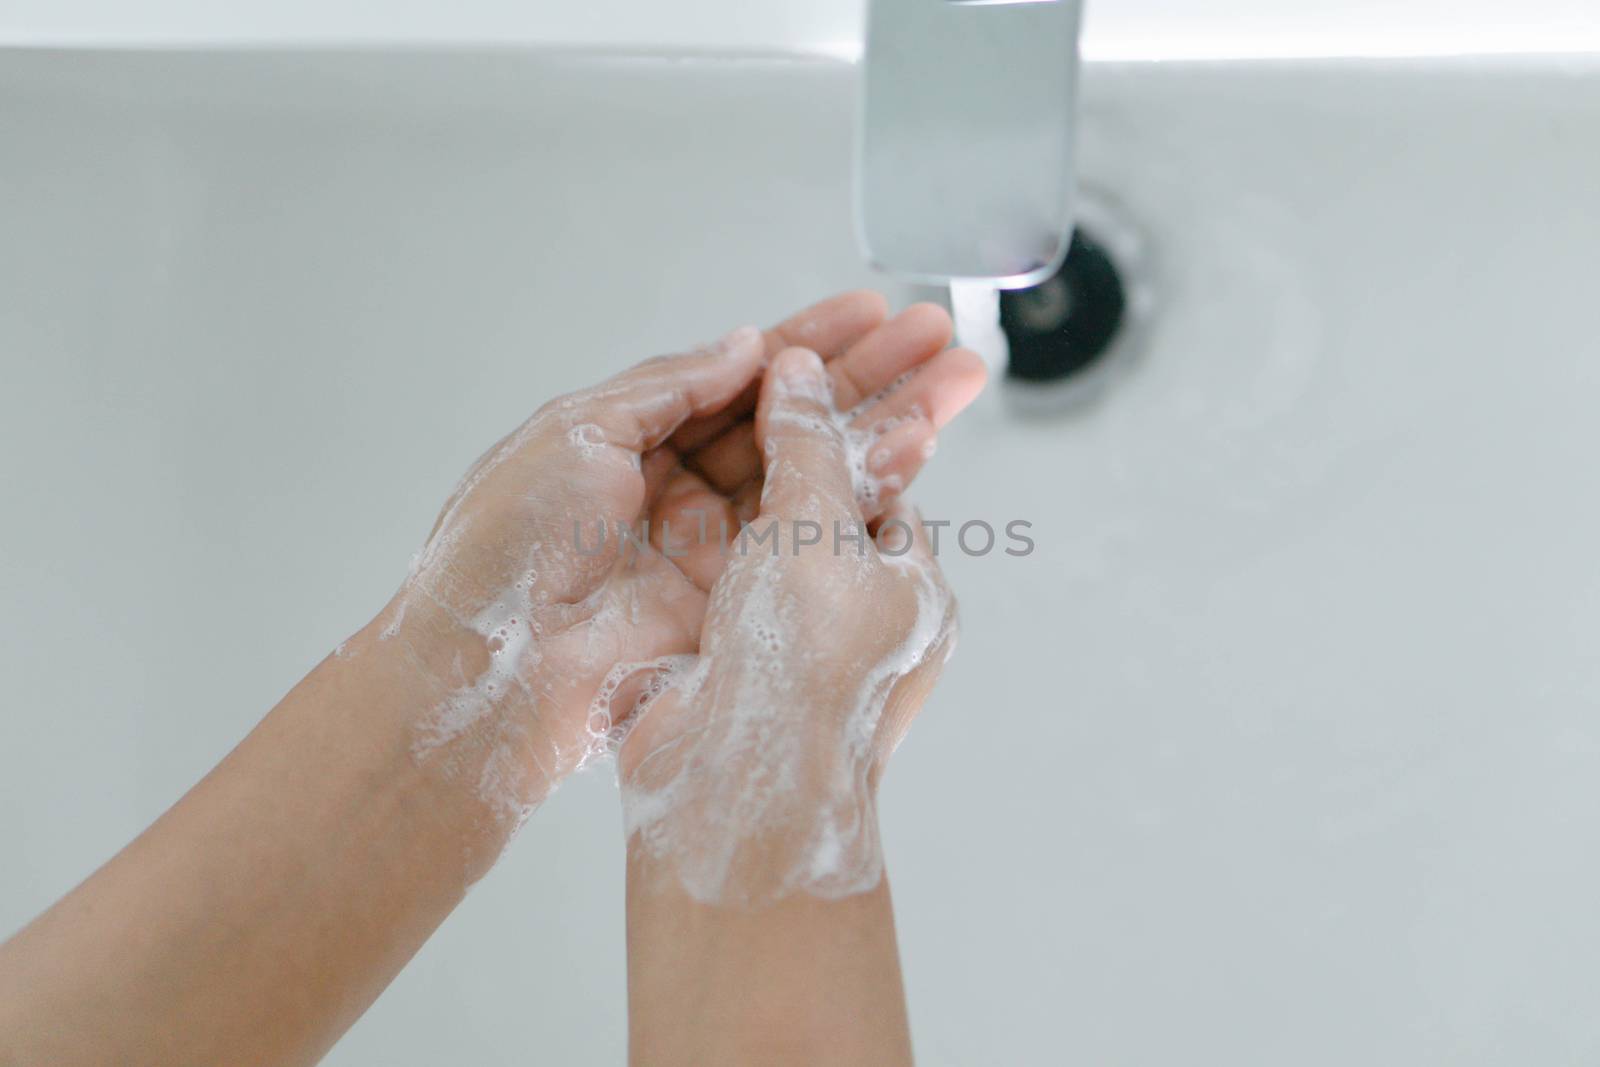 Closeup woman's hand washing with soap in bathroom, selective focus